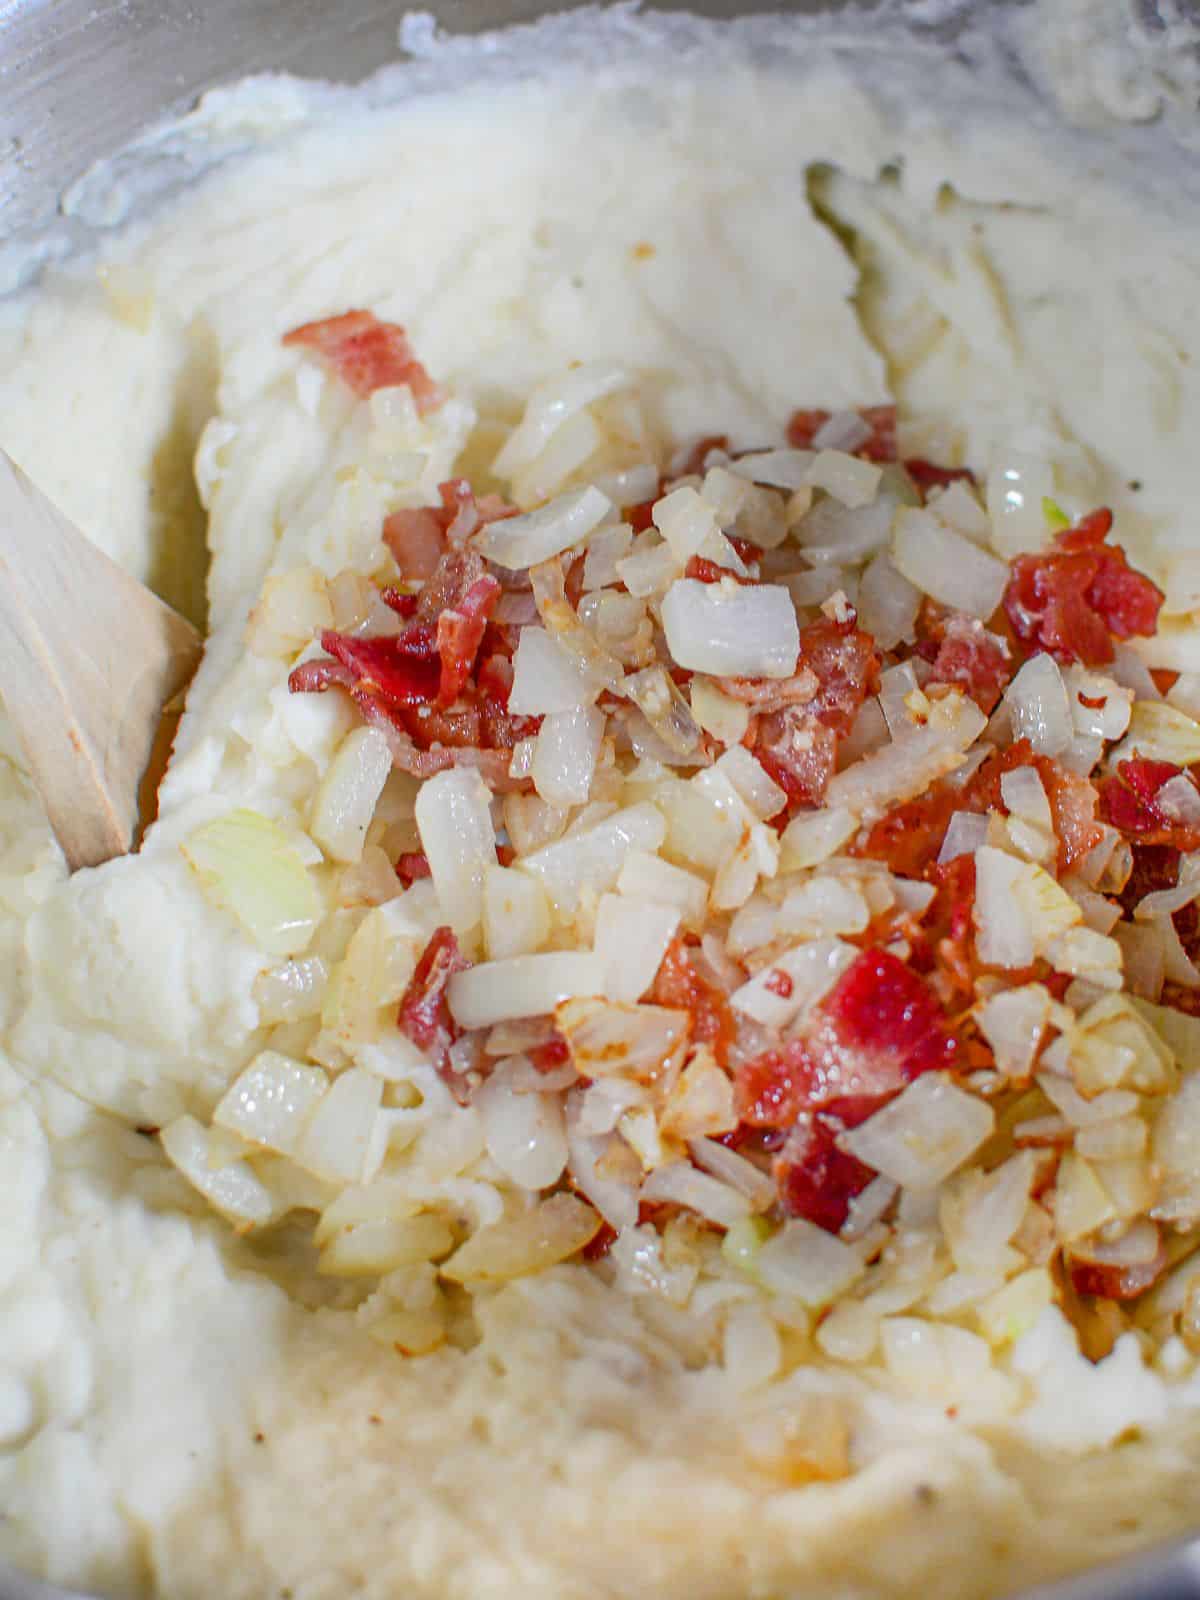 Add bacon and onions to mashed potato mixture.